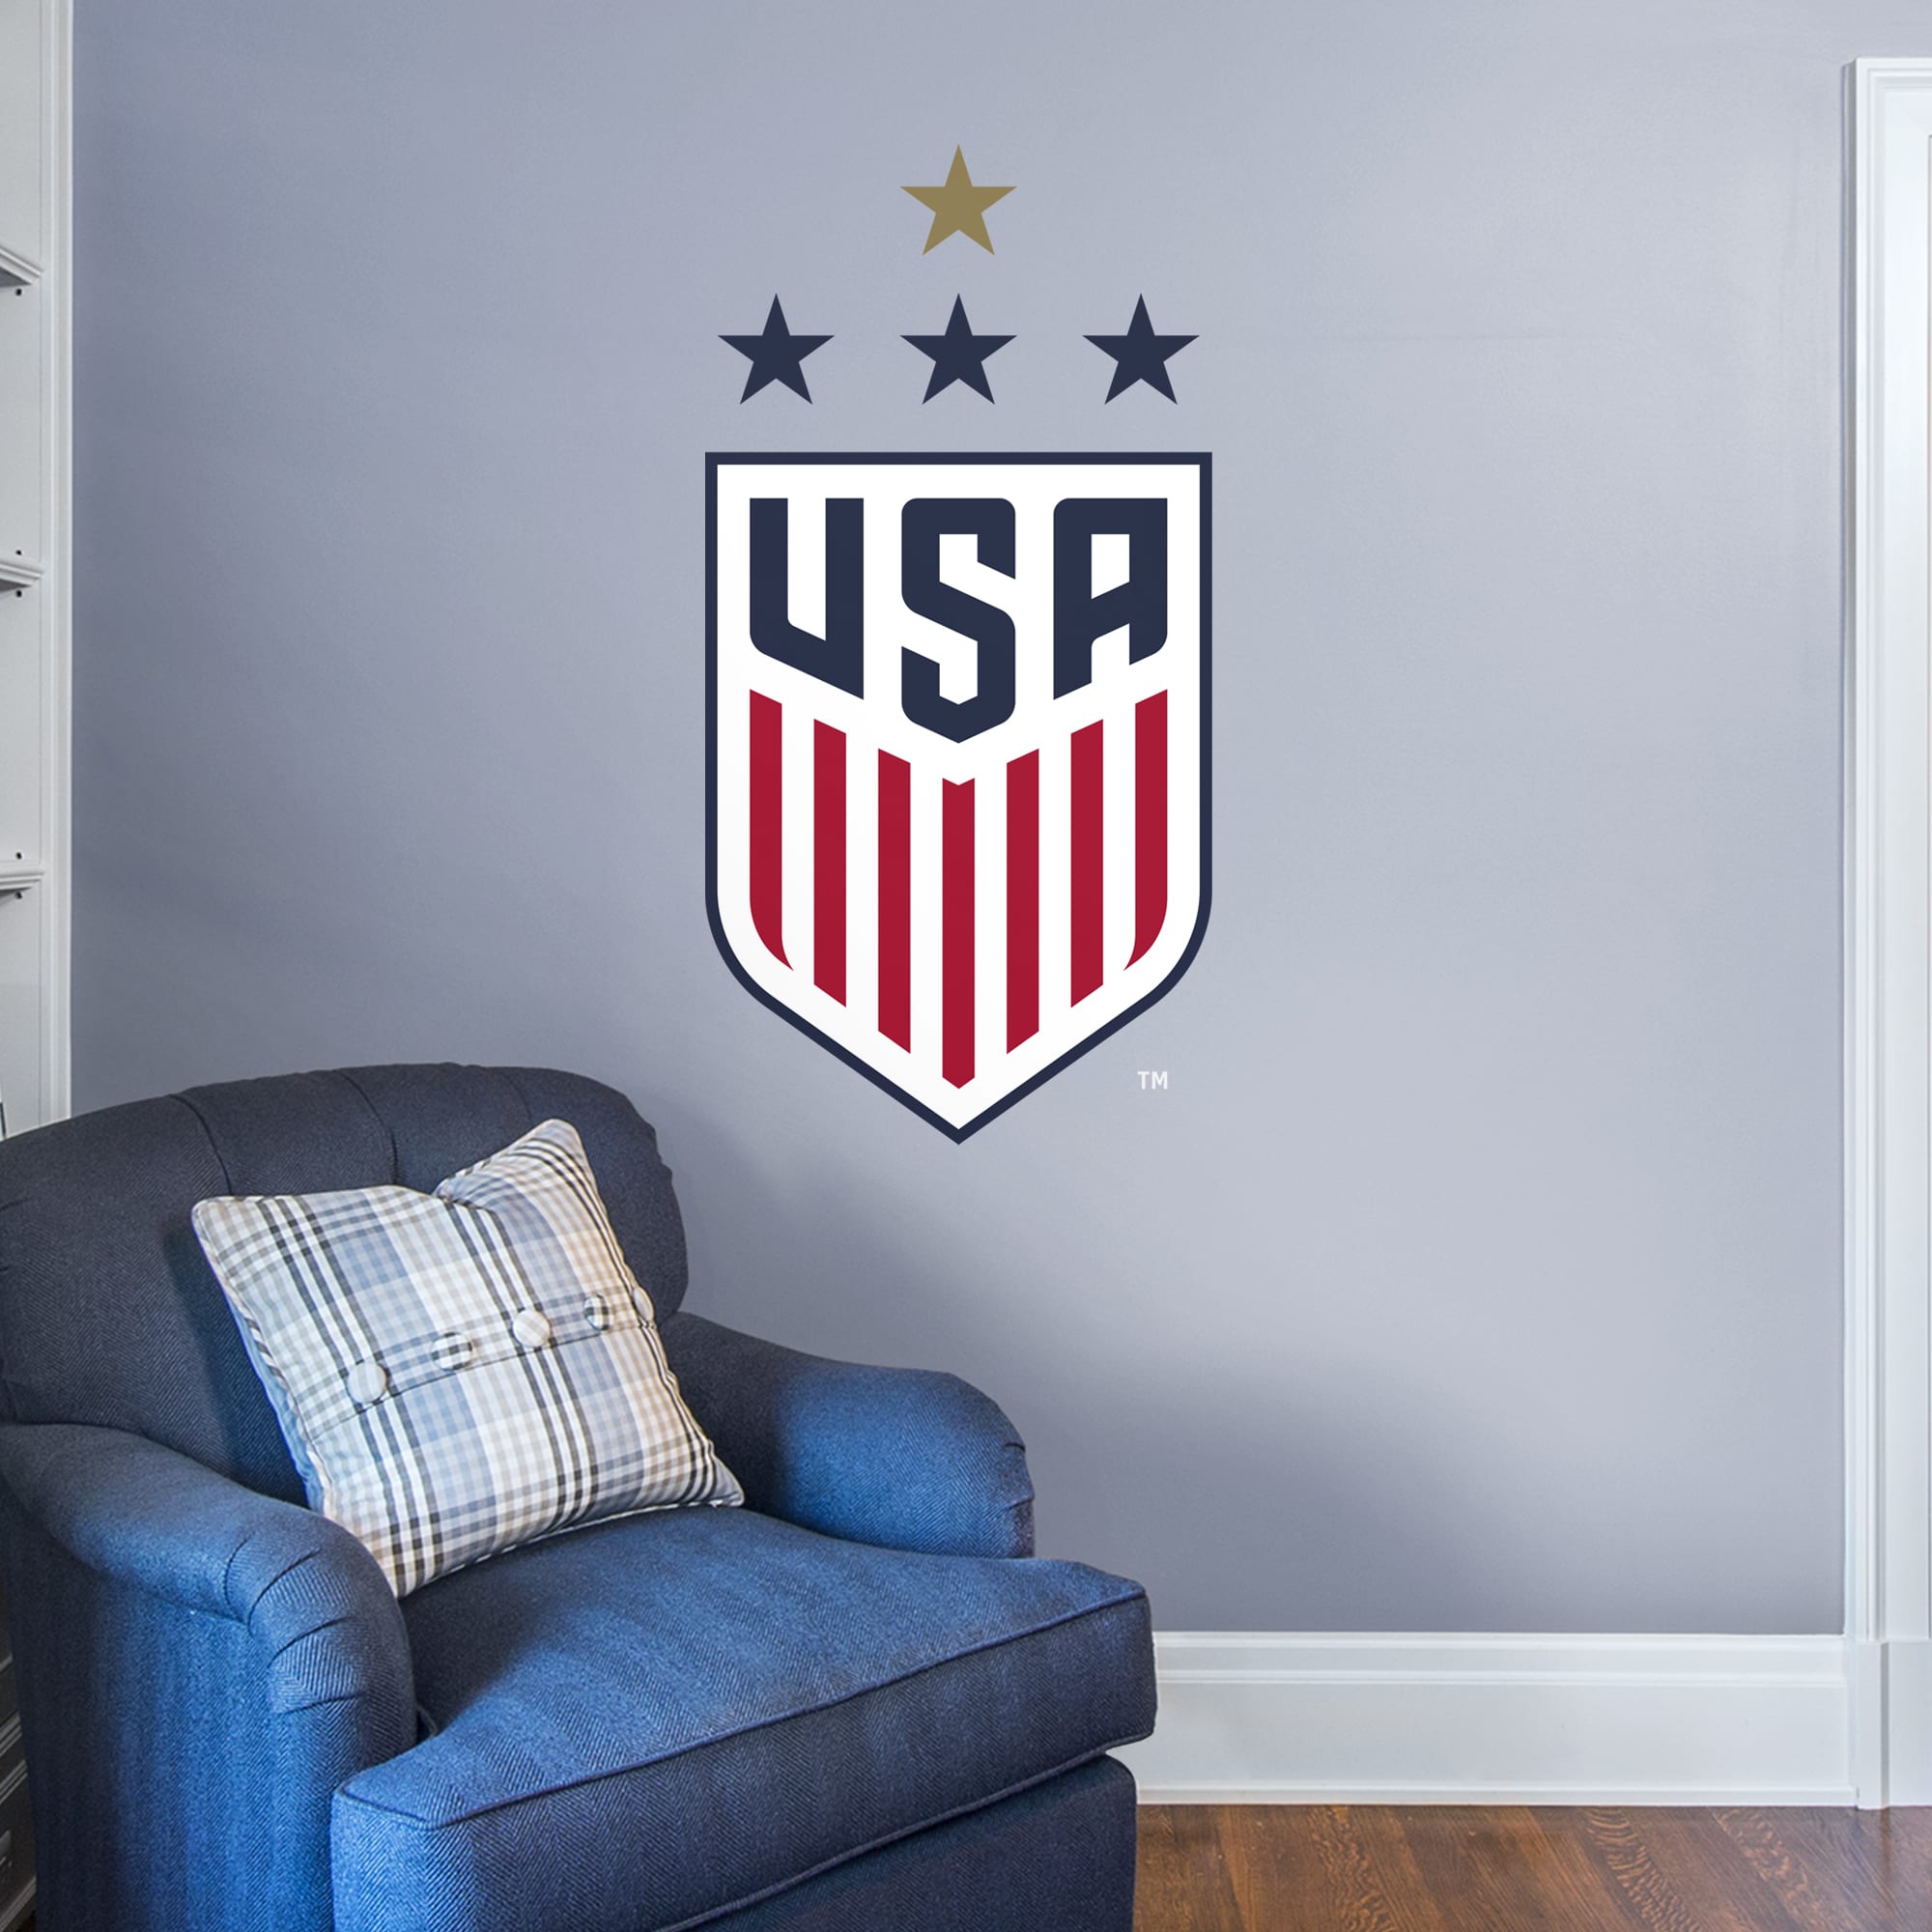 US Soccer for USWNT, Women in Sports: Womens National Team Crest - Officially Licensed Removable Wall Decal by Fathead | Vinyl